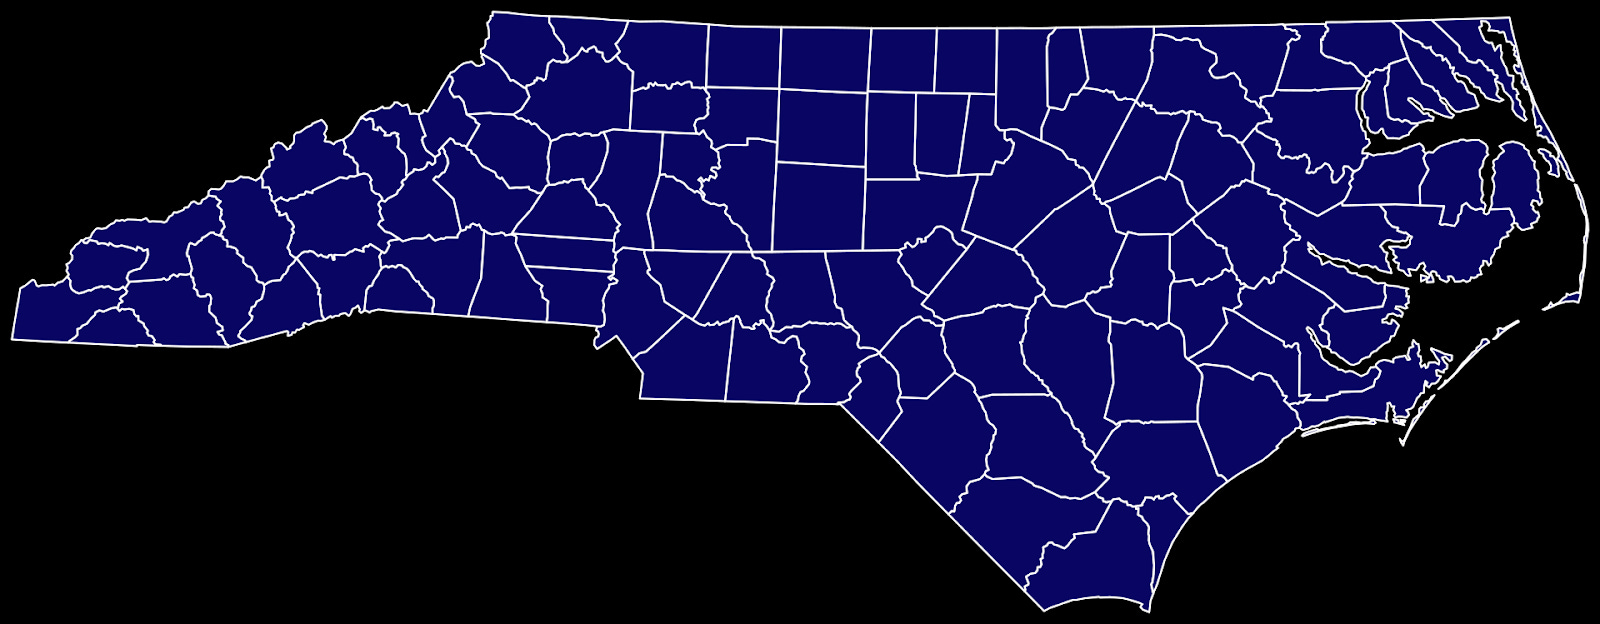 The results of the 2012 North carolina Attorney General's race, in which incumbent and future Governor Roy Cooper received 100% of the vote due to being the only candidate on the ballot.